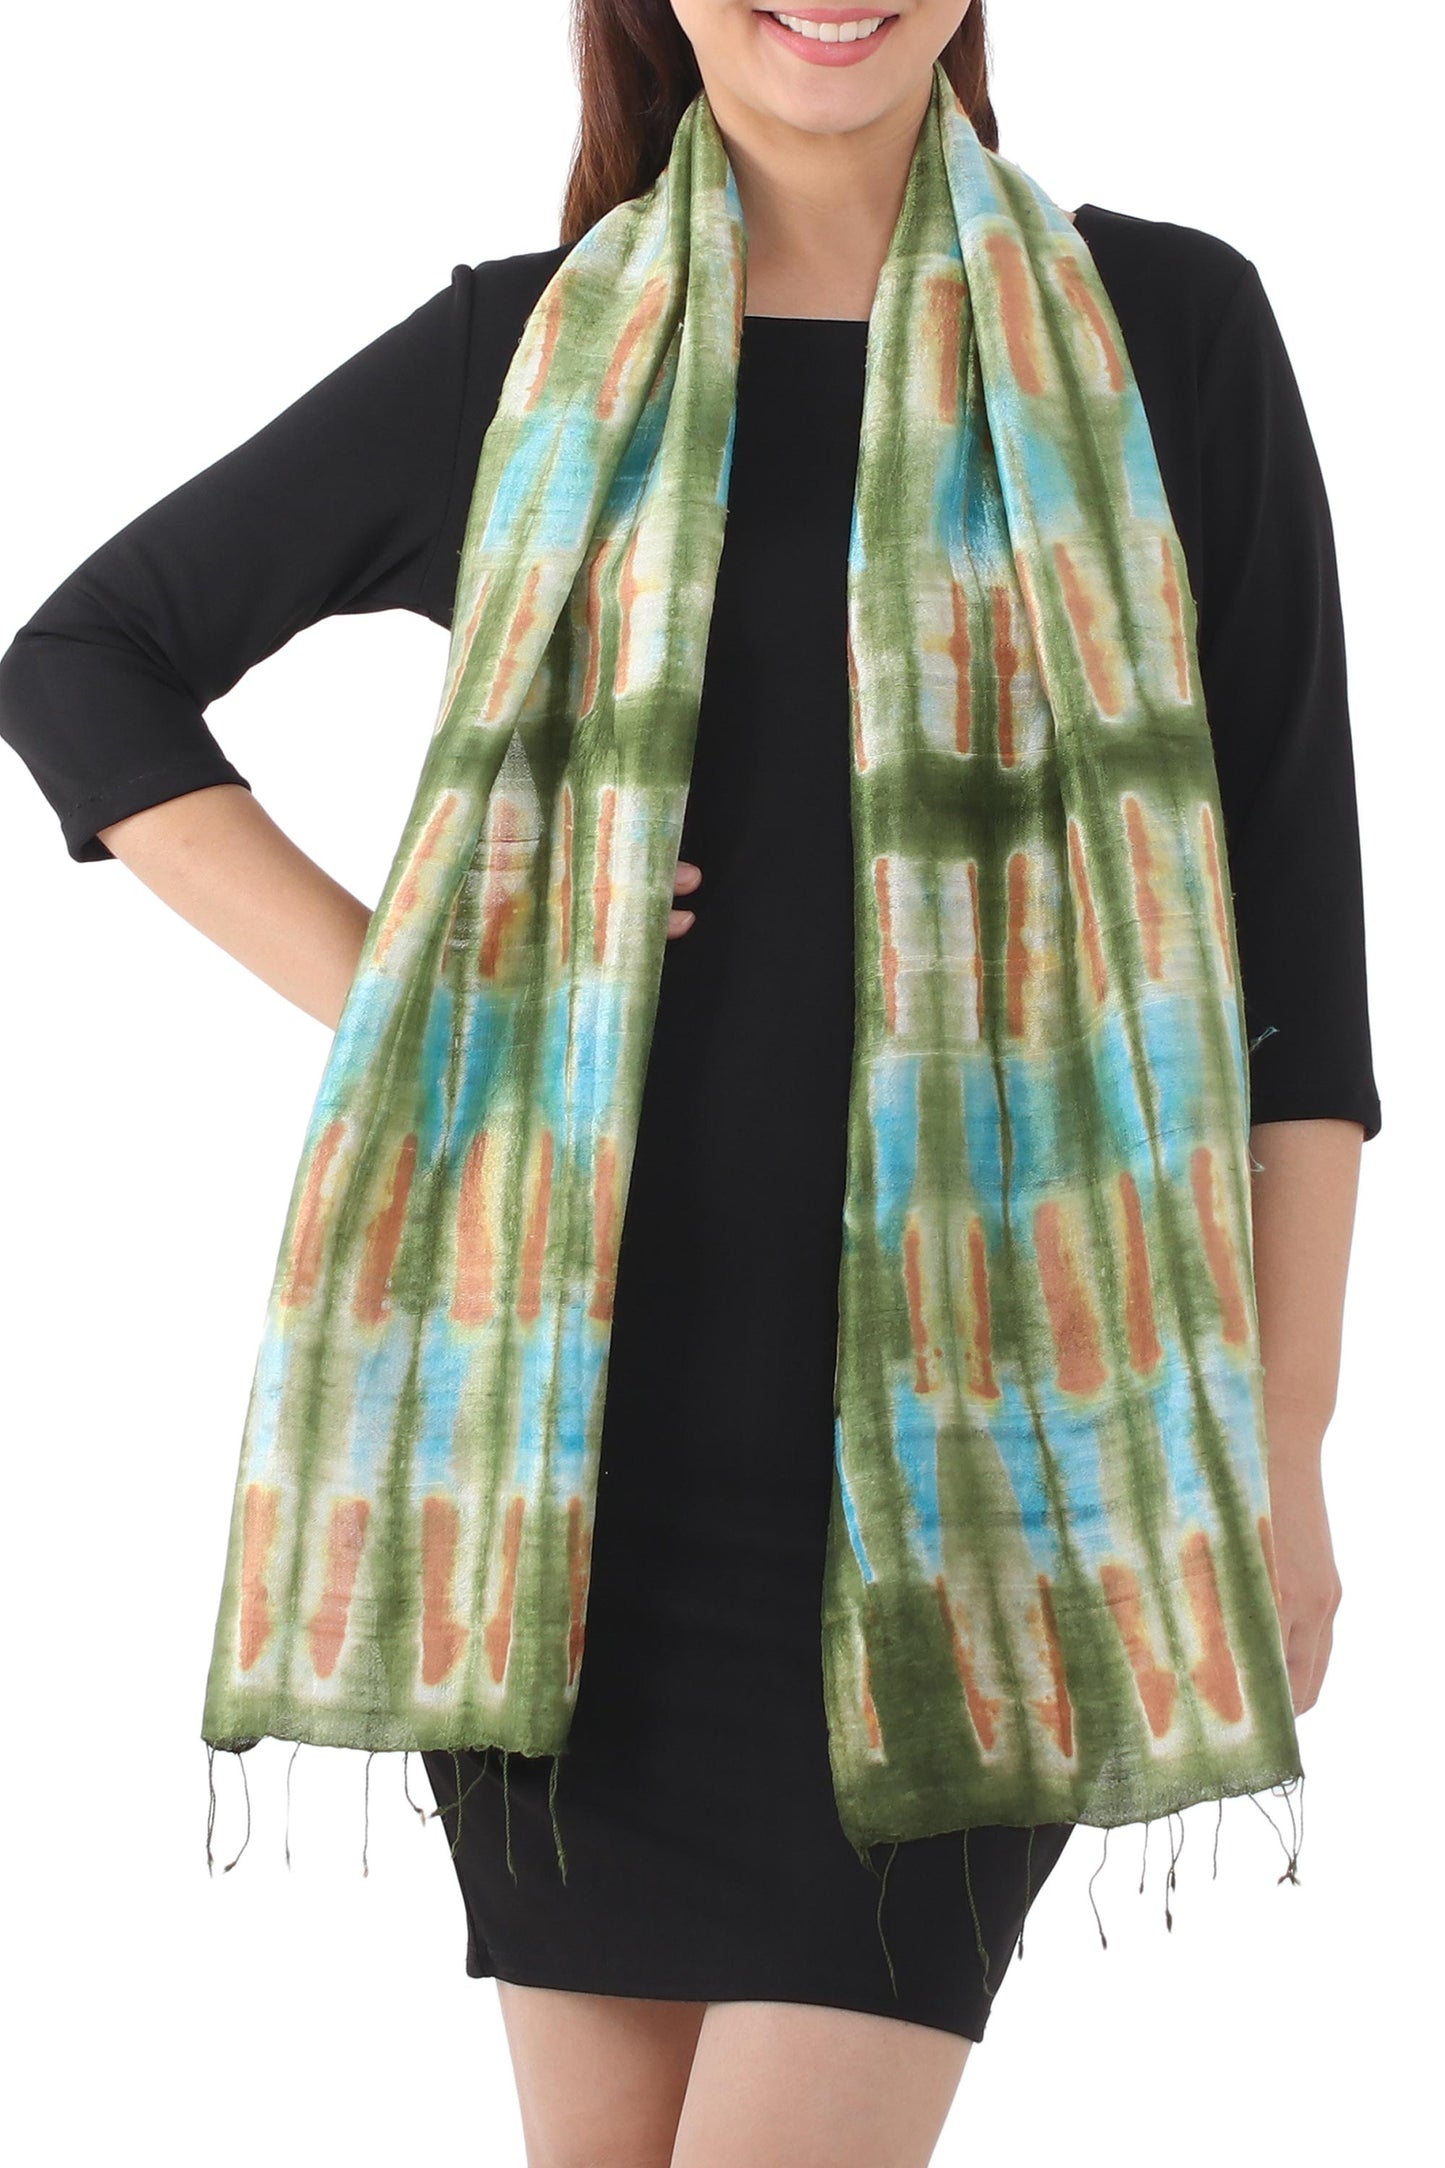 Green Thai River Tie-Dye Green and Blue Silk Scarf from Thailand